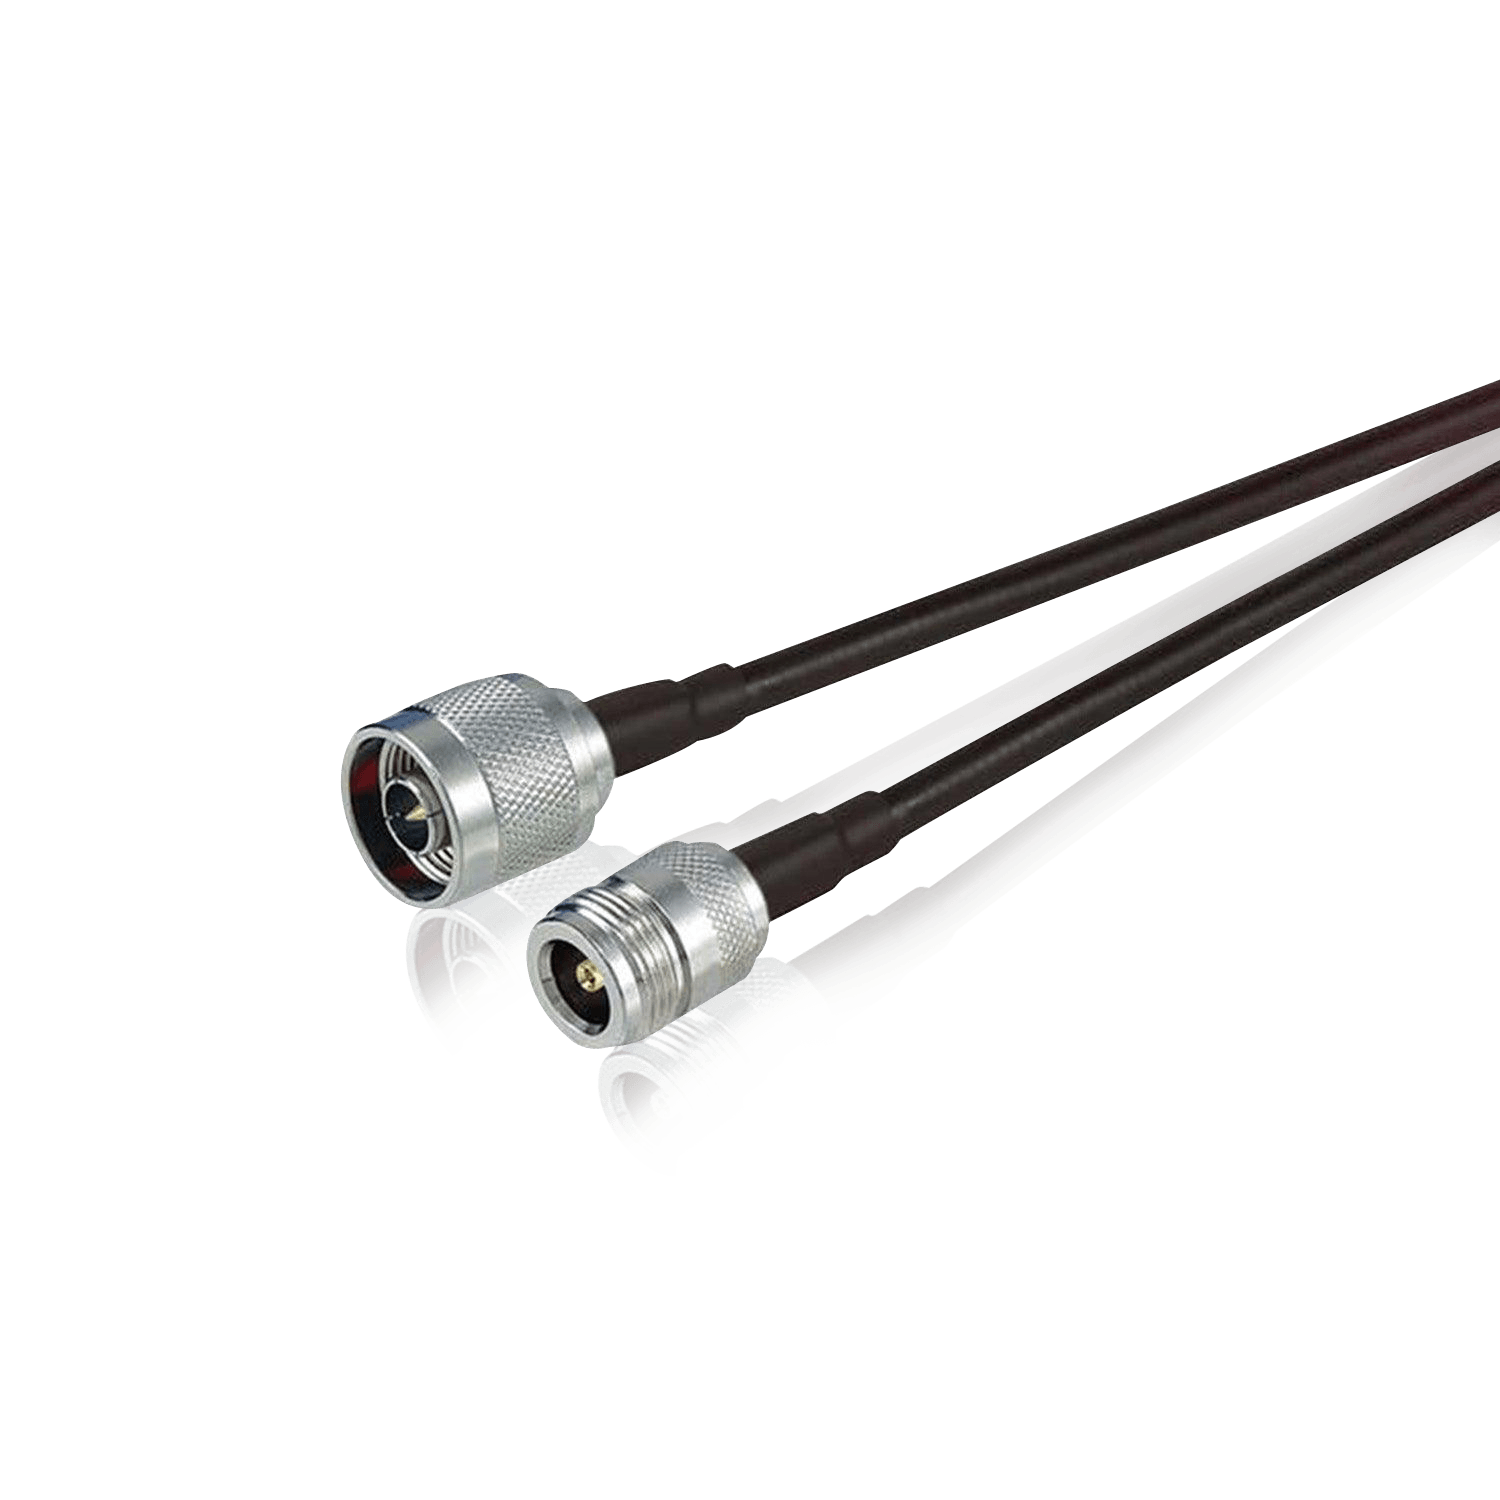 LMR-400 Coaxial Cable - N Female - N Male - Mapping Network